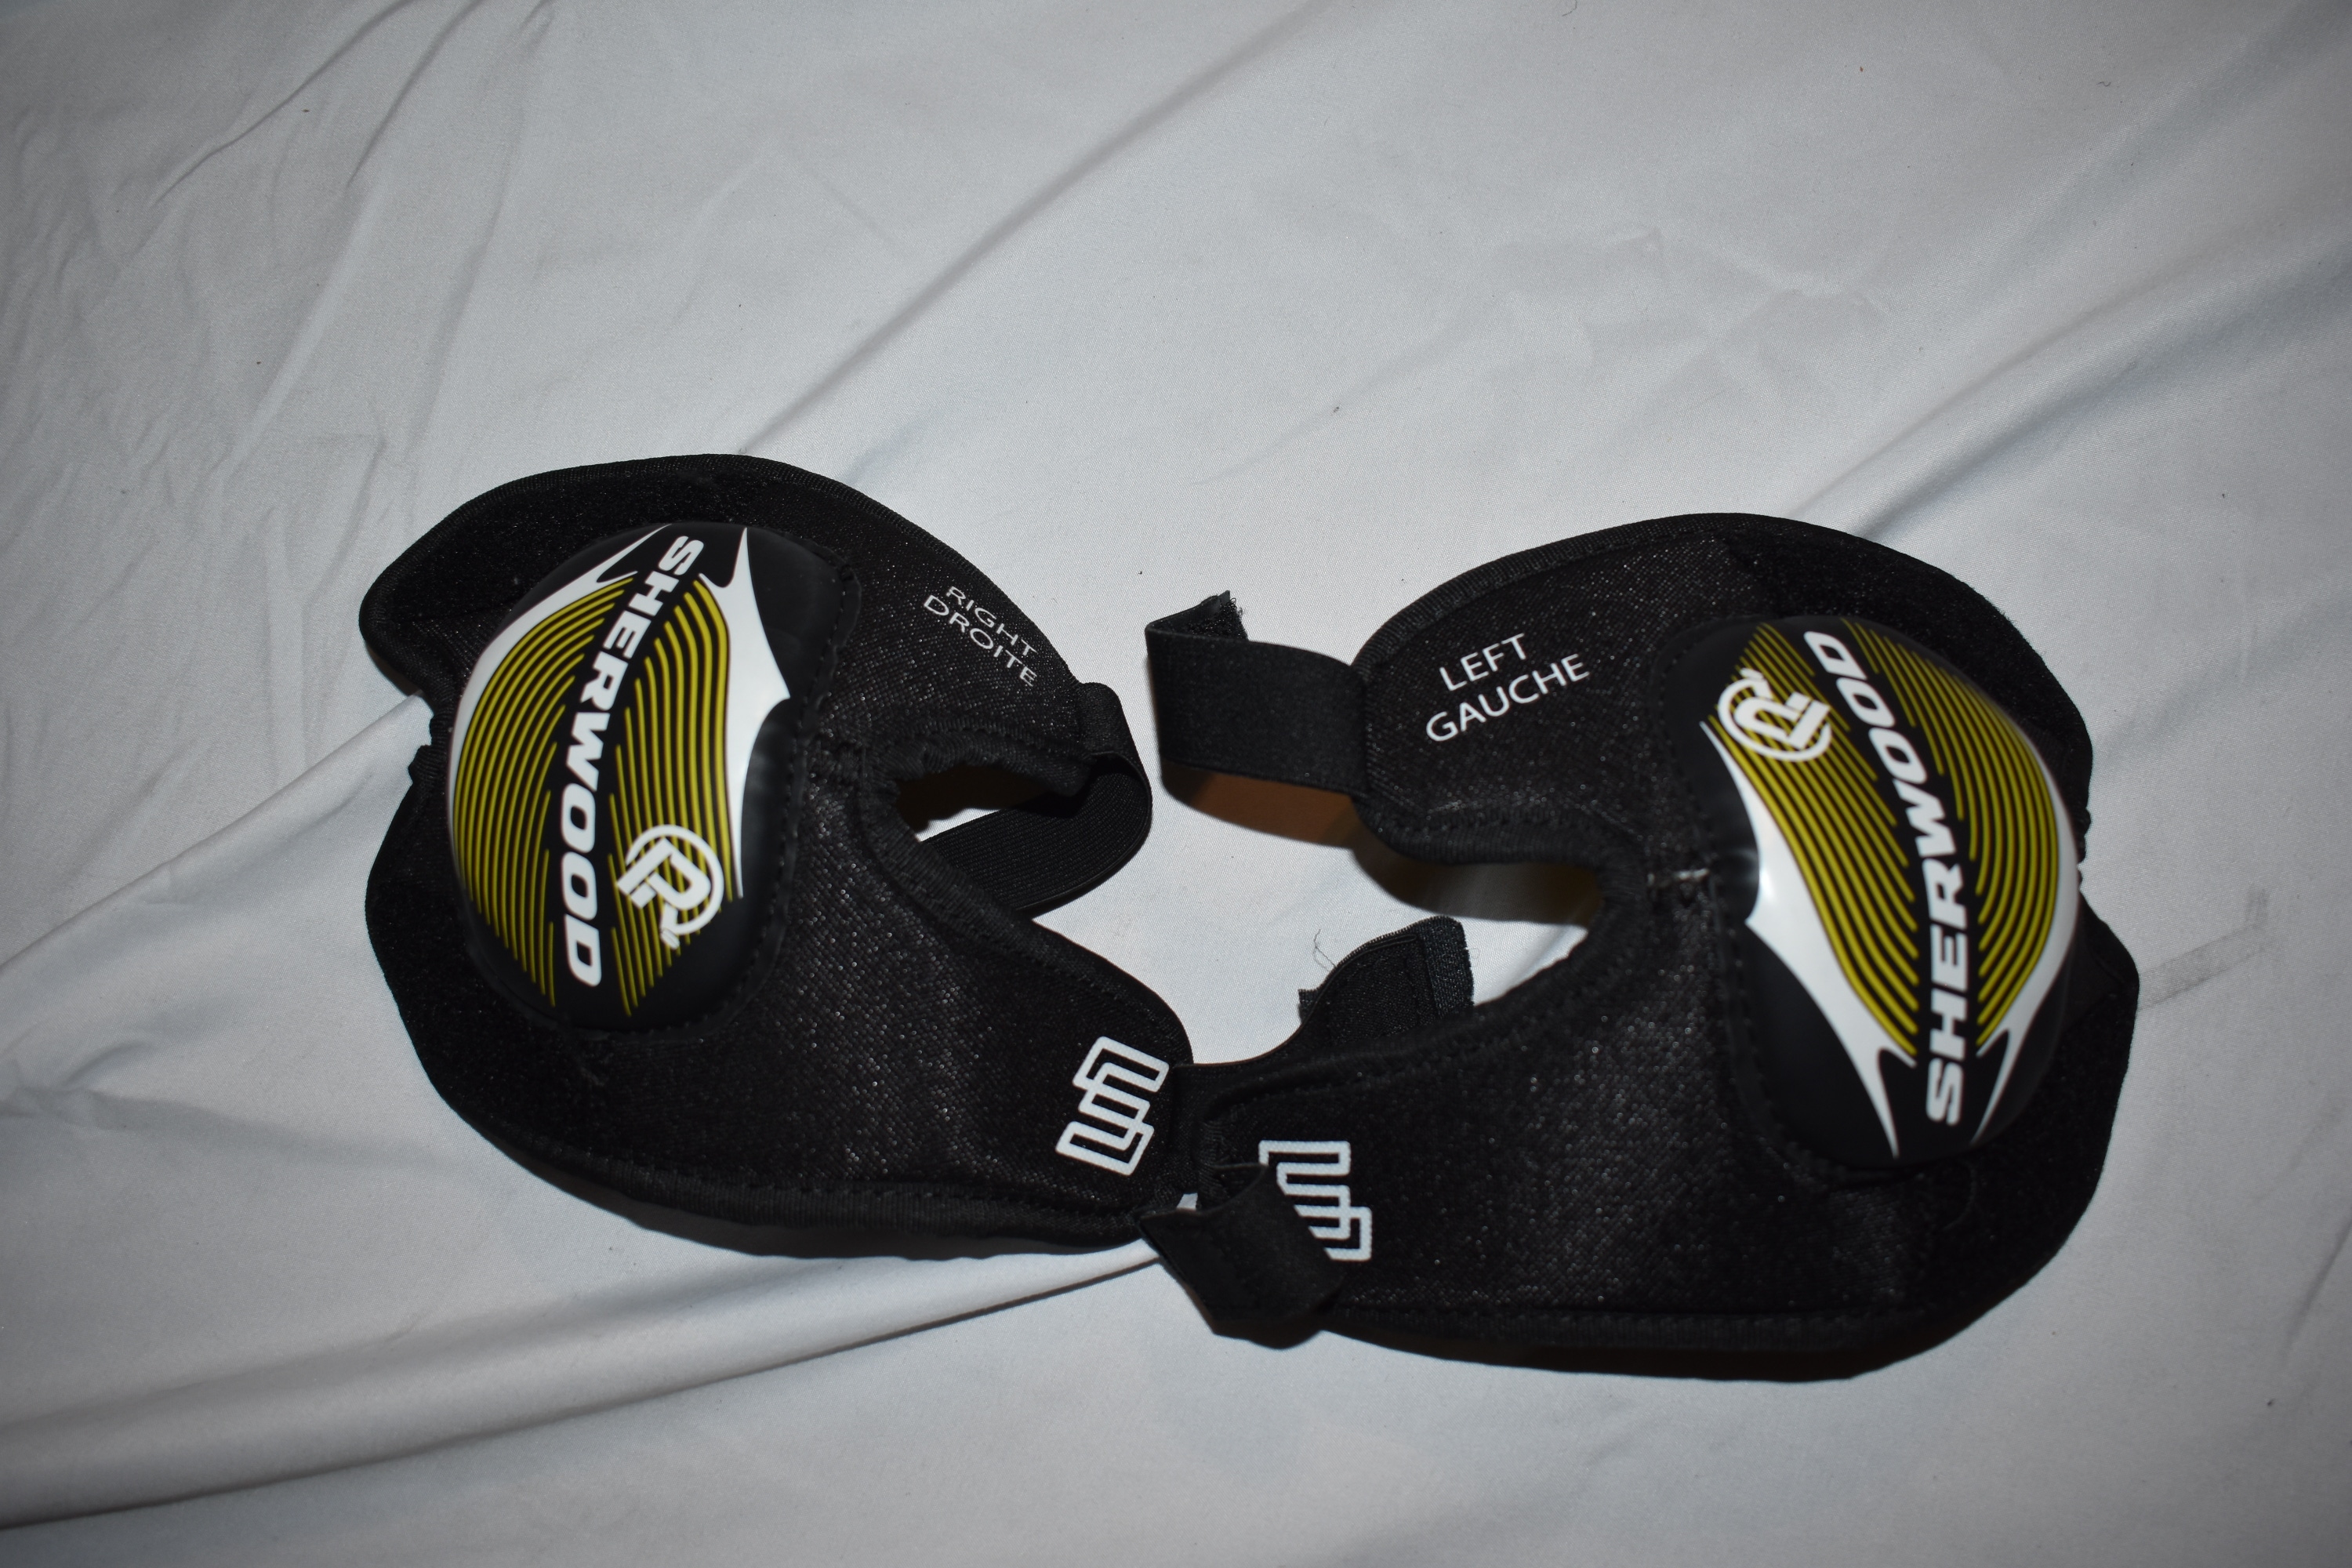 Sher-Wood PlayRite Hockey Elbow Pads, Black/Yellow, Youth L/XL - Great Condition!